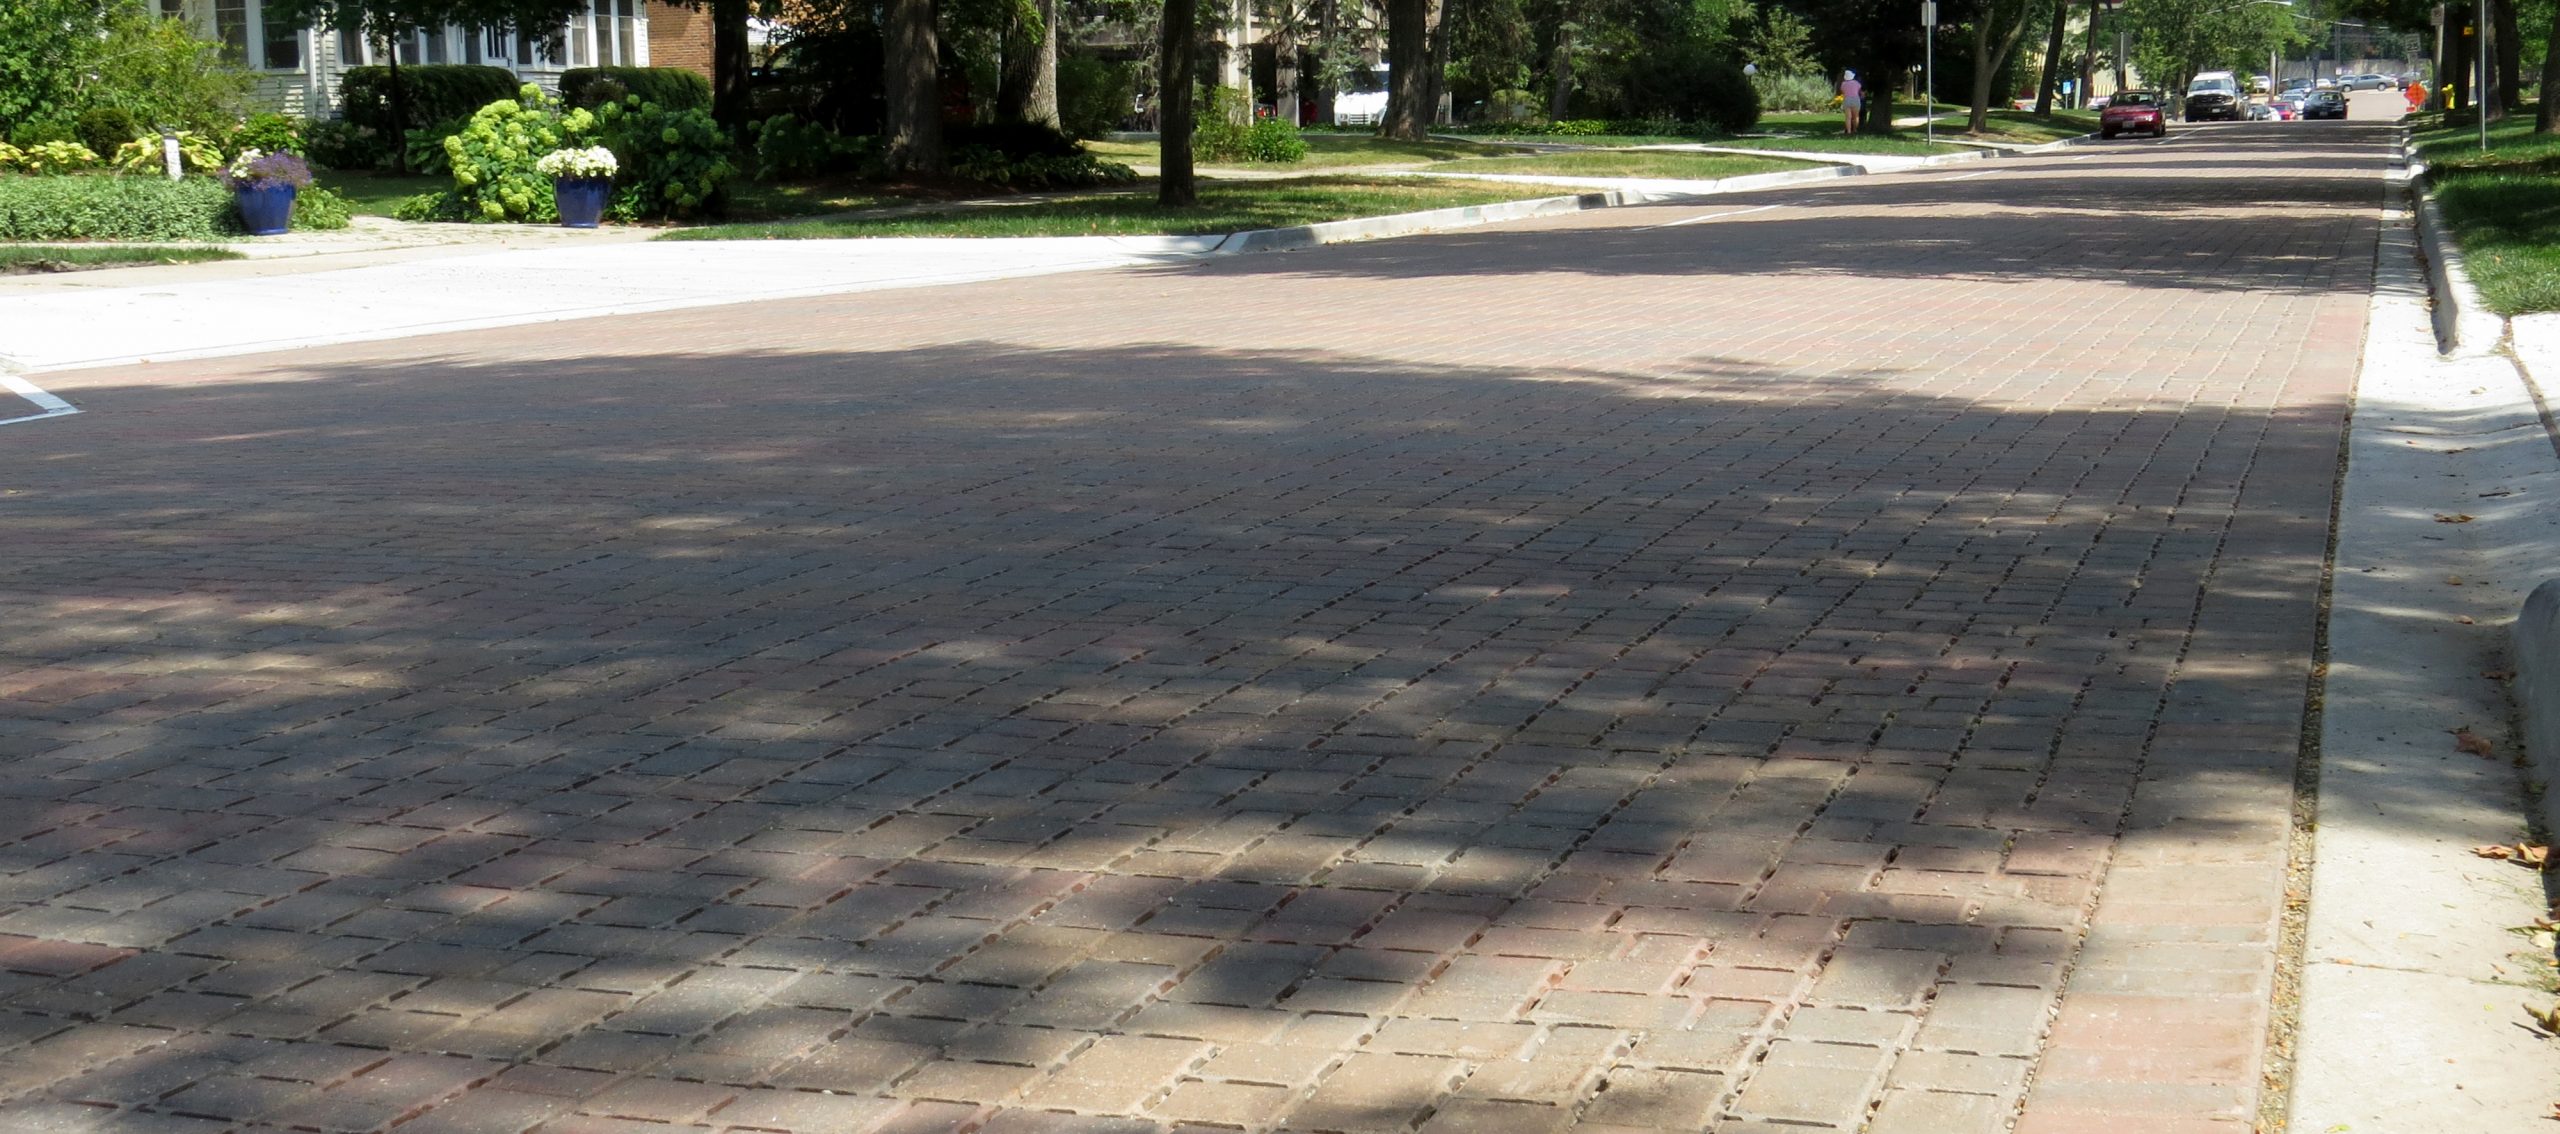 A warm hue of Eco-Optiloc pavers is used on the main roadway of Grove Street, with houses on both sides of the street.